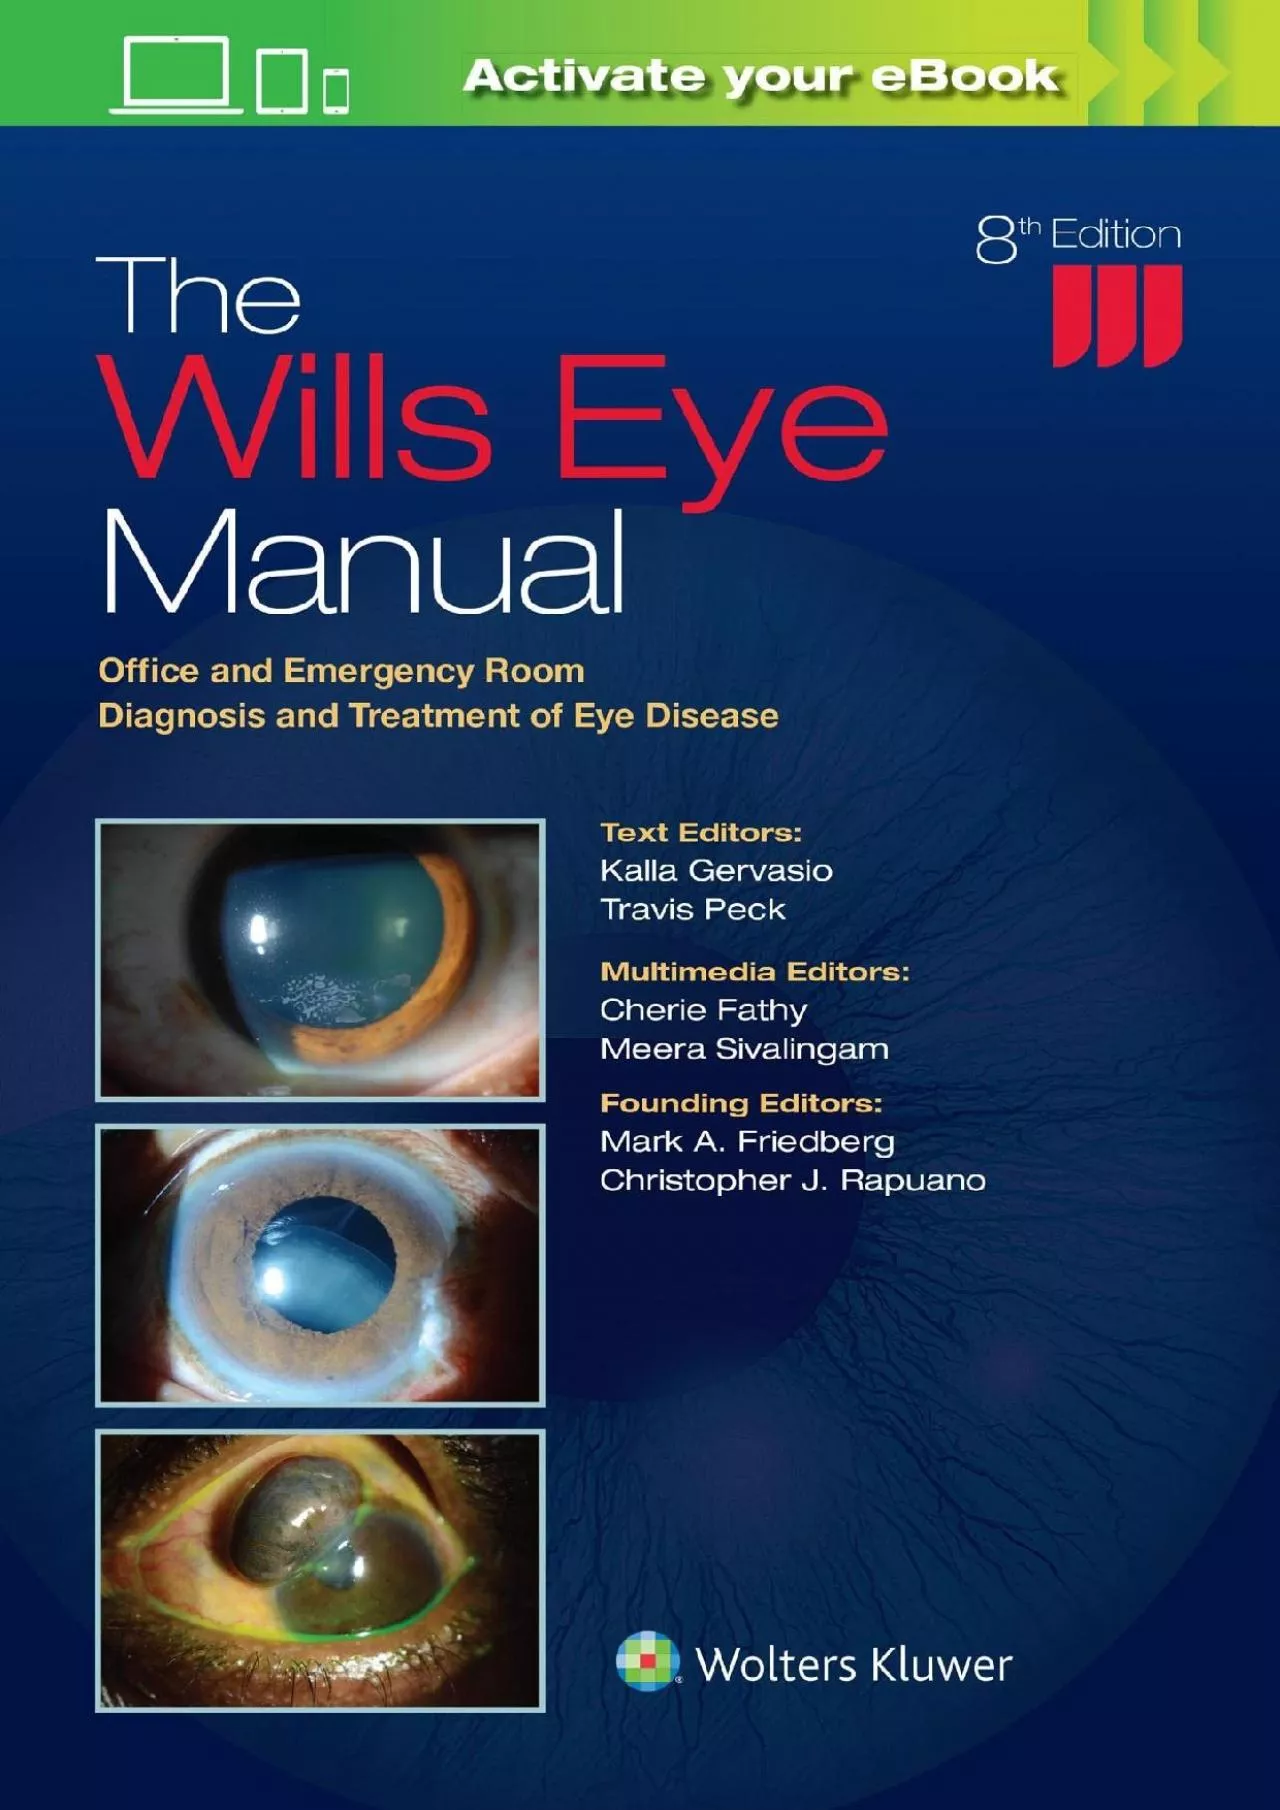 [EBOOK] The Wills Eye Manual: Office and Emergency Room Diagnosis and Treatment of Eye